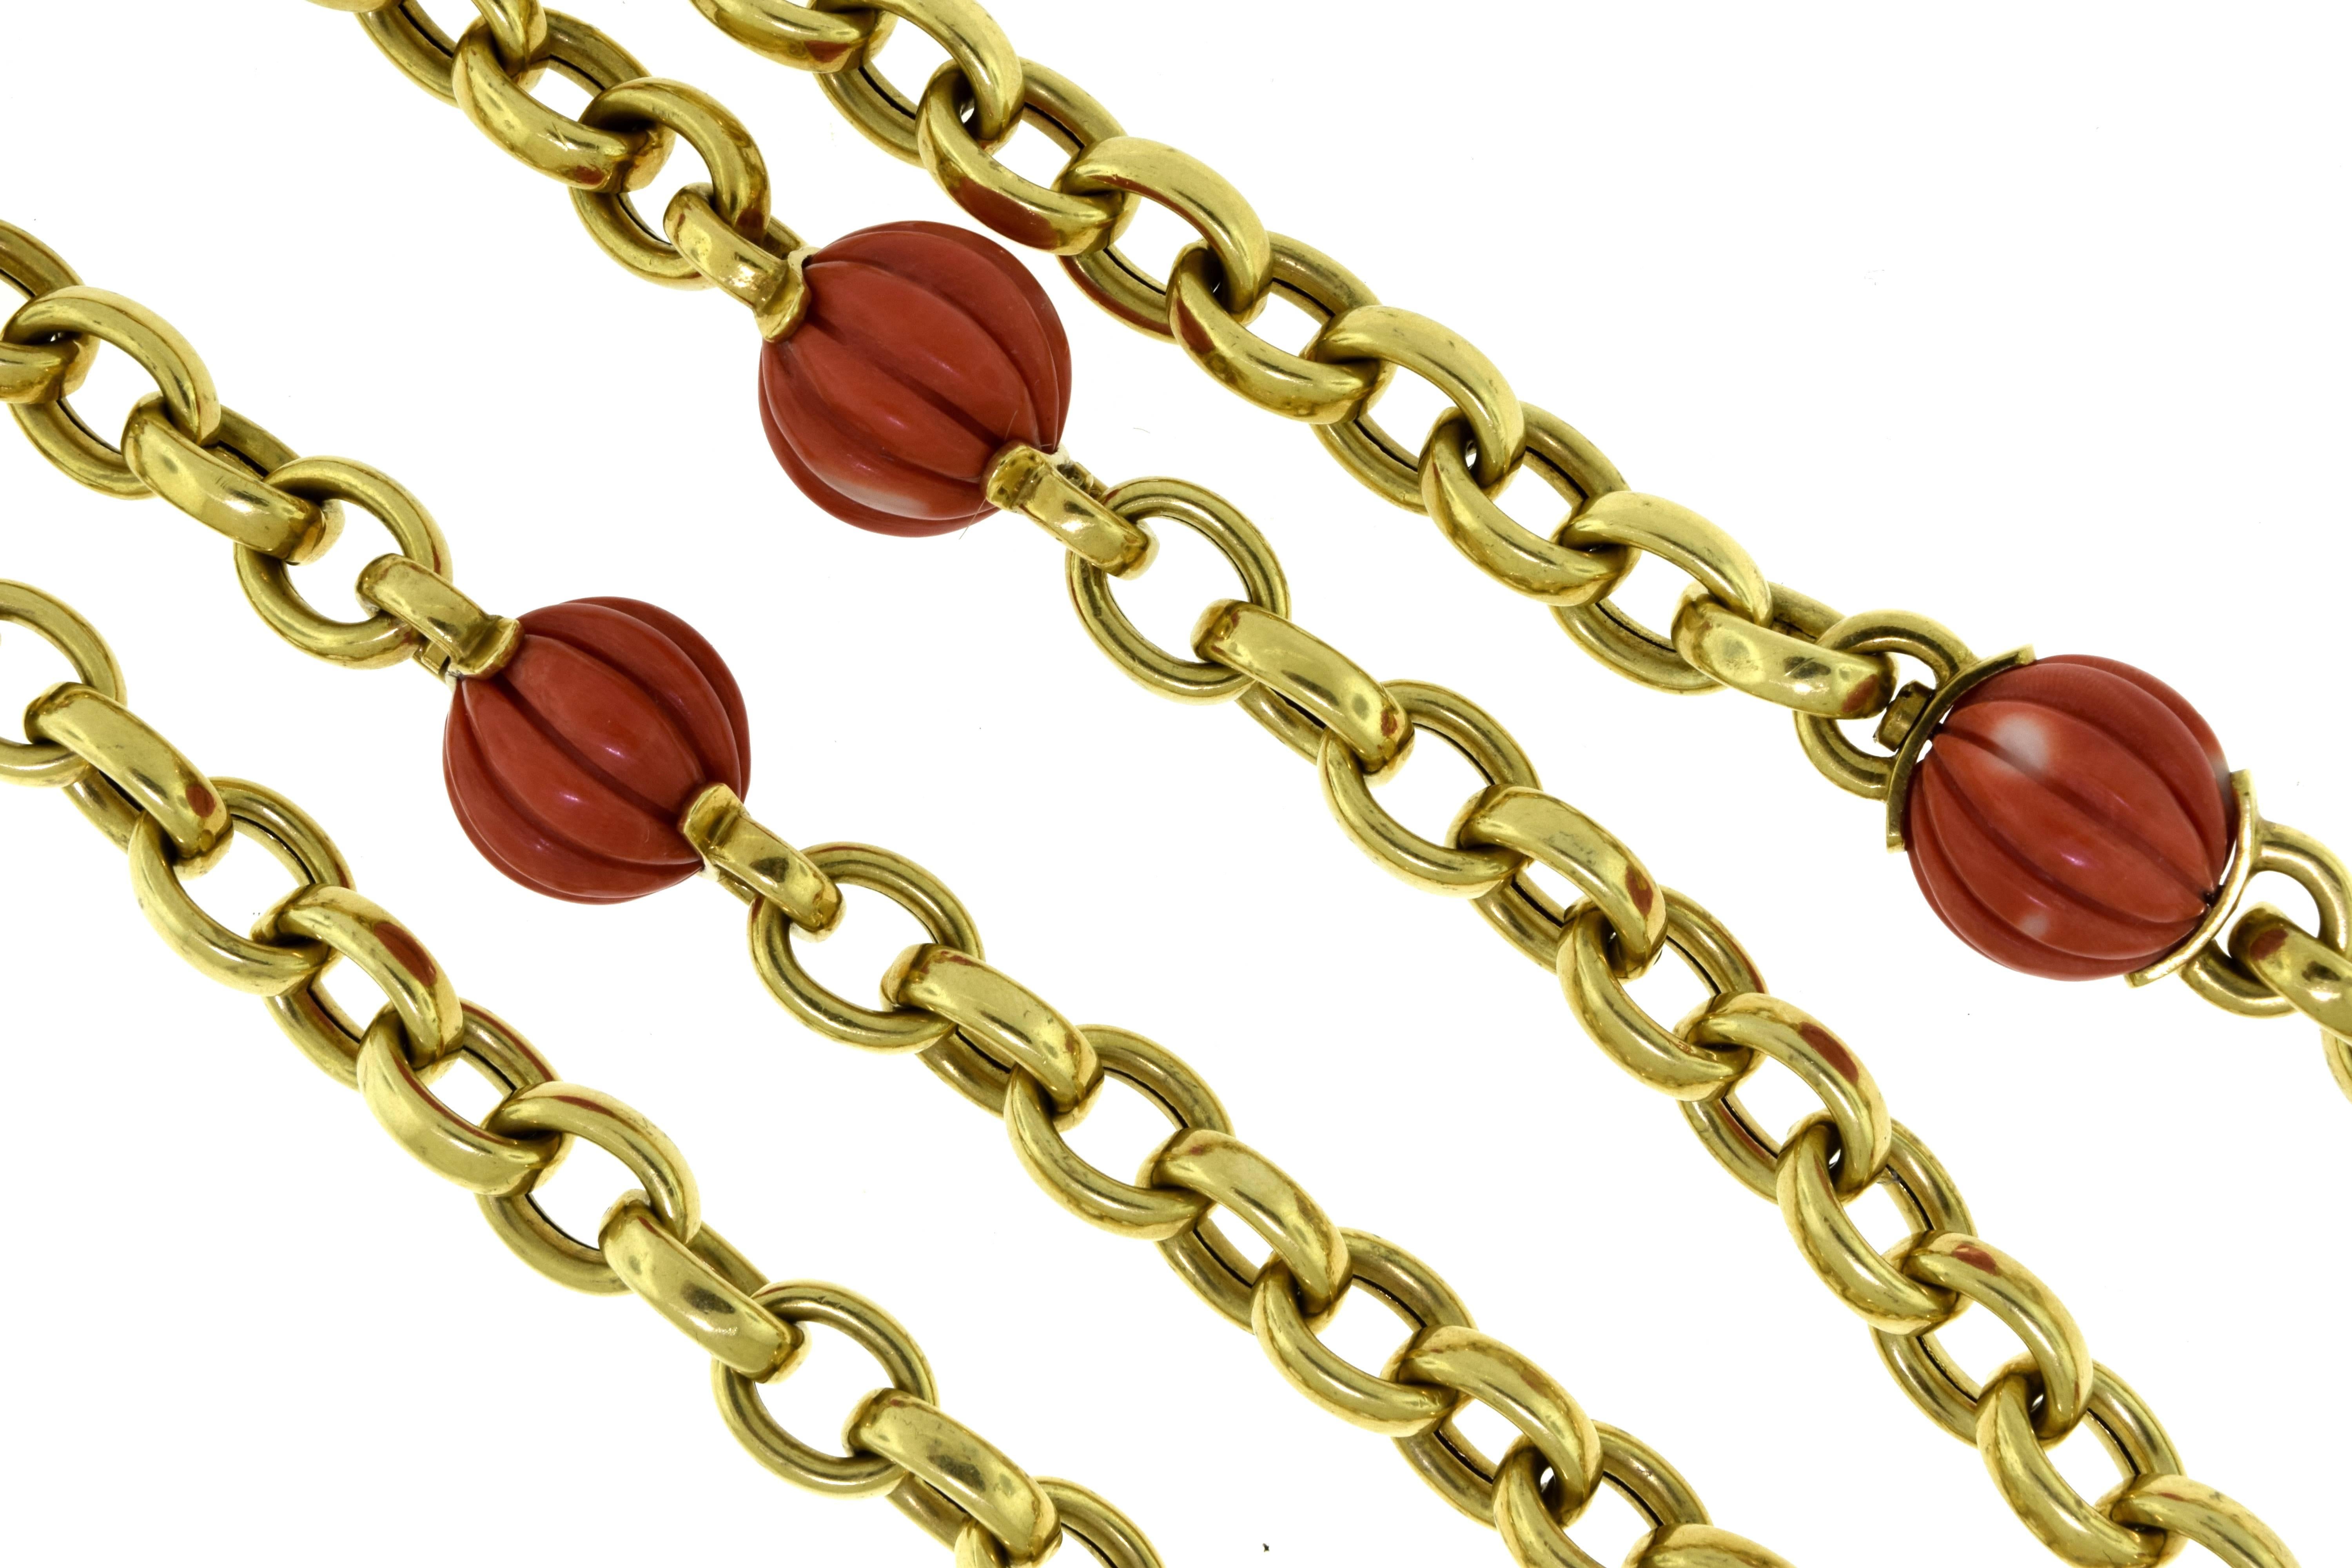 Gorgeous Yellow Gold Ridged Overlap Link Antique Necklace from the 1970's

Metal: 18k Yellow Gold
Stones: Red Coral
Total Item Weight (grams): 126
Total Length: 39 inches
Red Coral Diameter: 19.0 mm (biggest coral) ; 14.7 mm (smallest coral)
